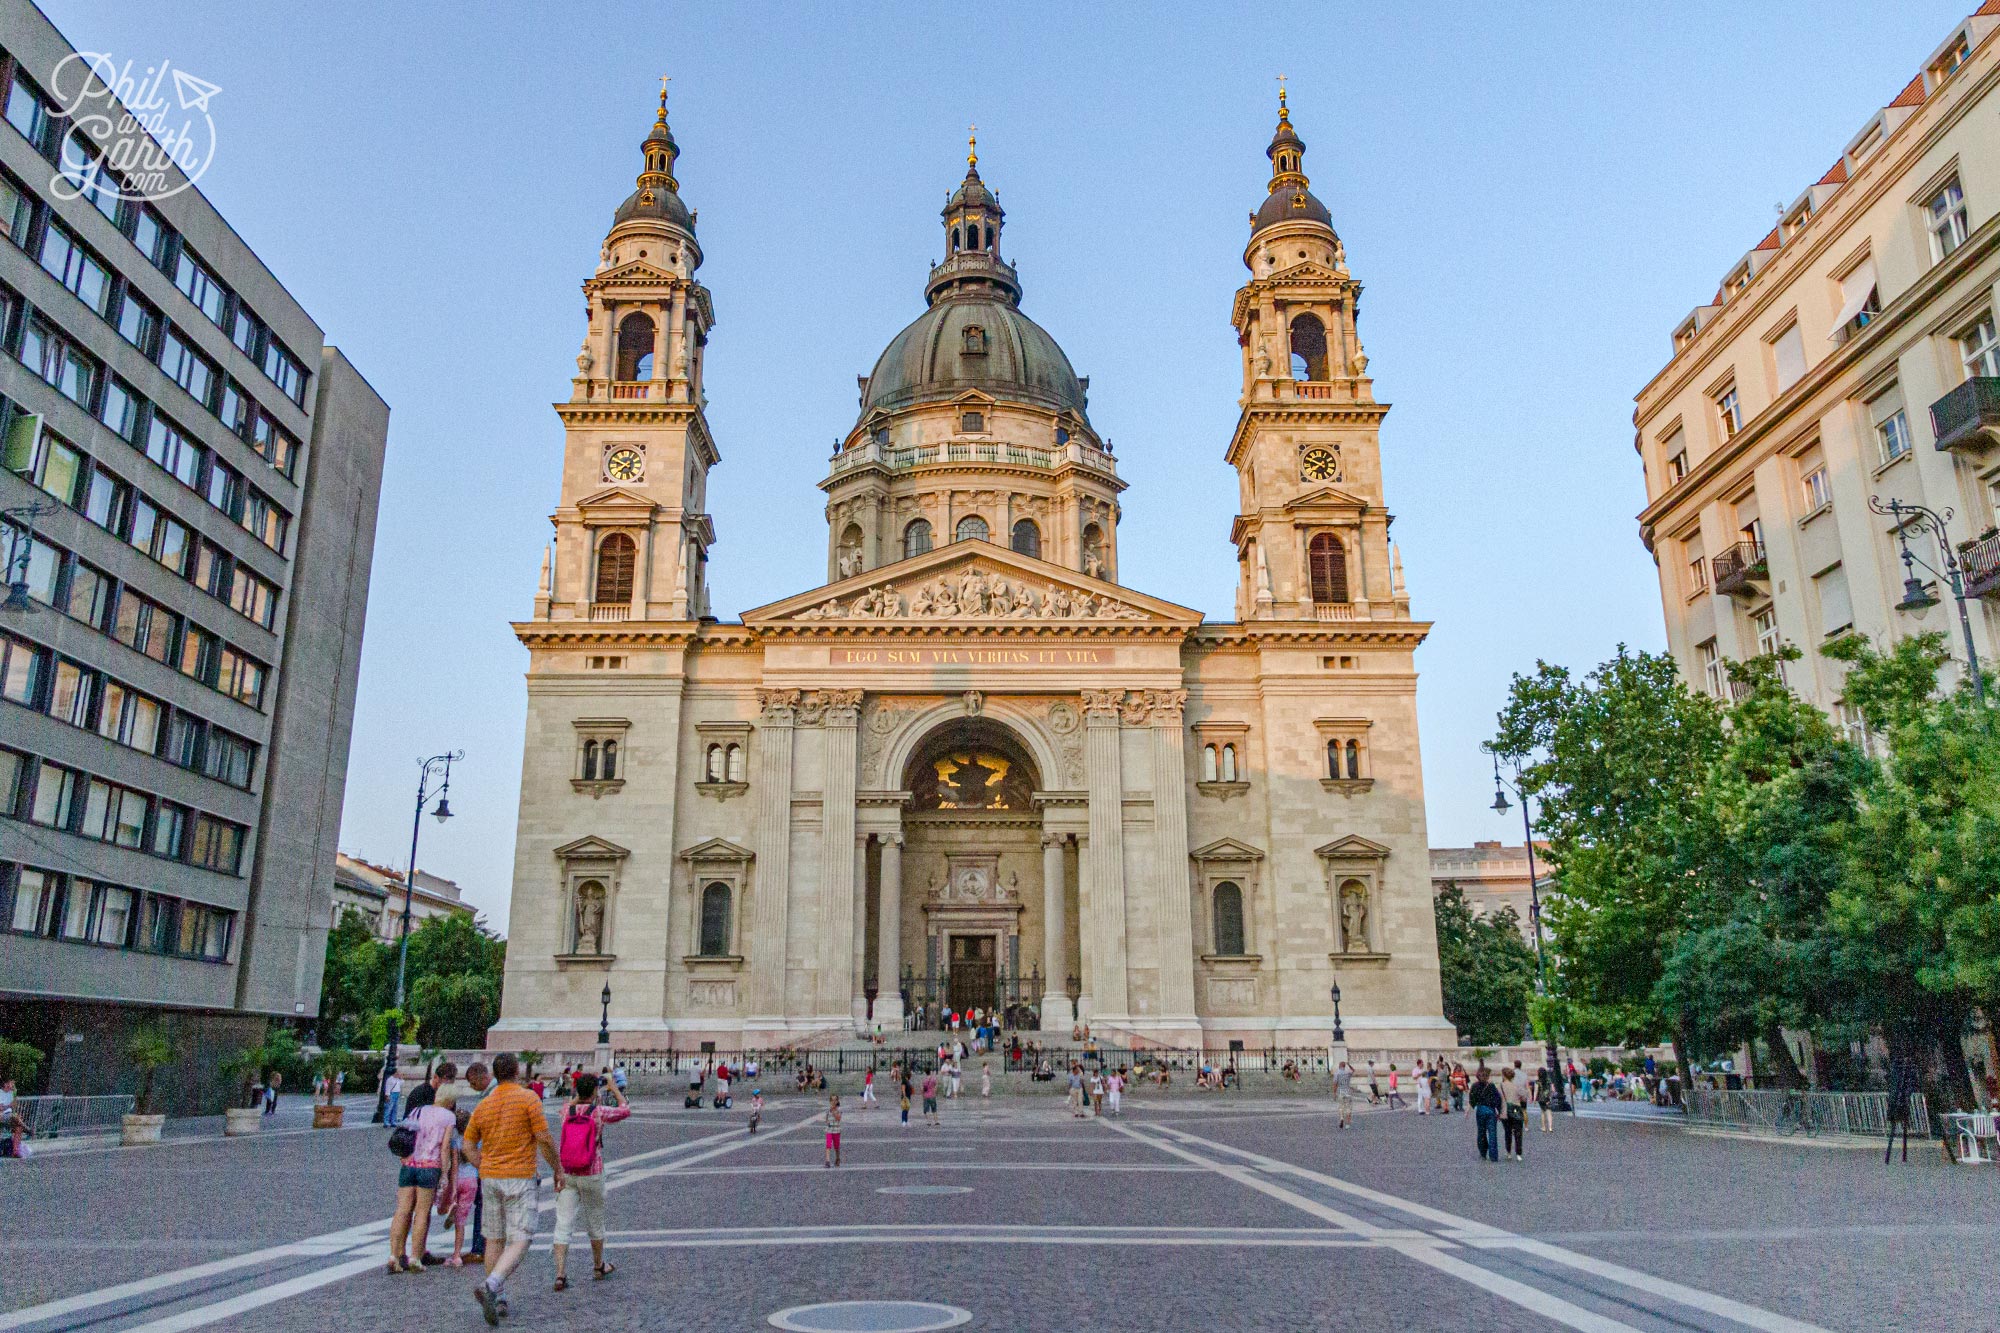 St. Stephen’s Basilica was completed in 1905 and took 50 years to build